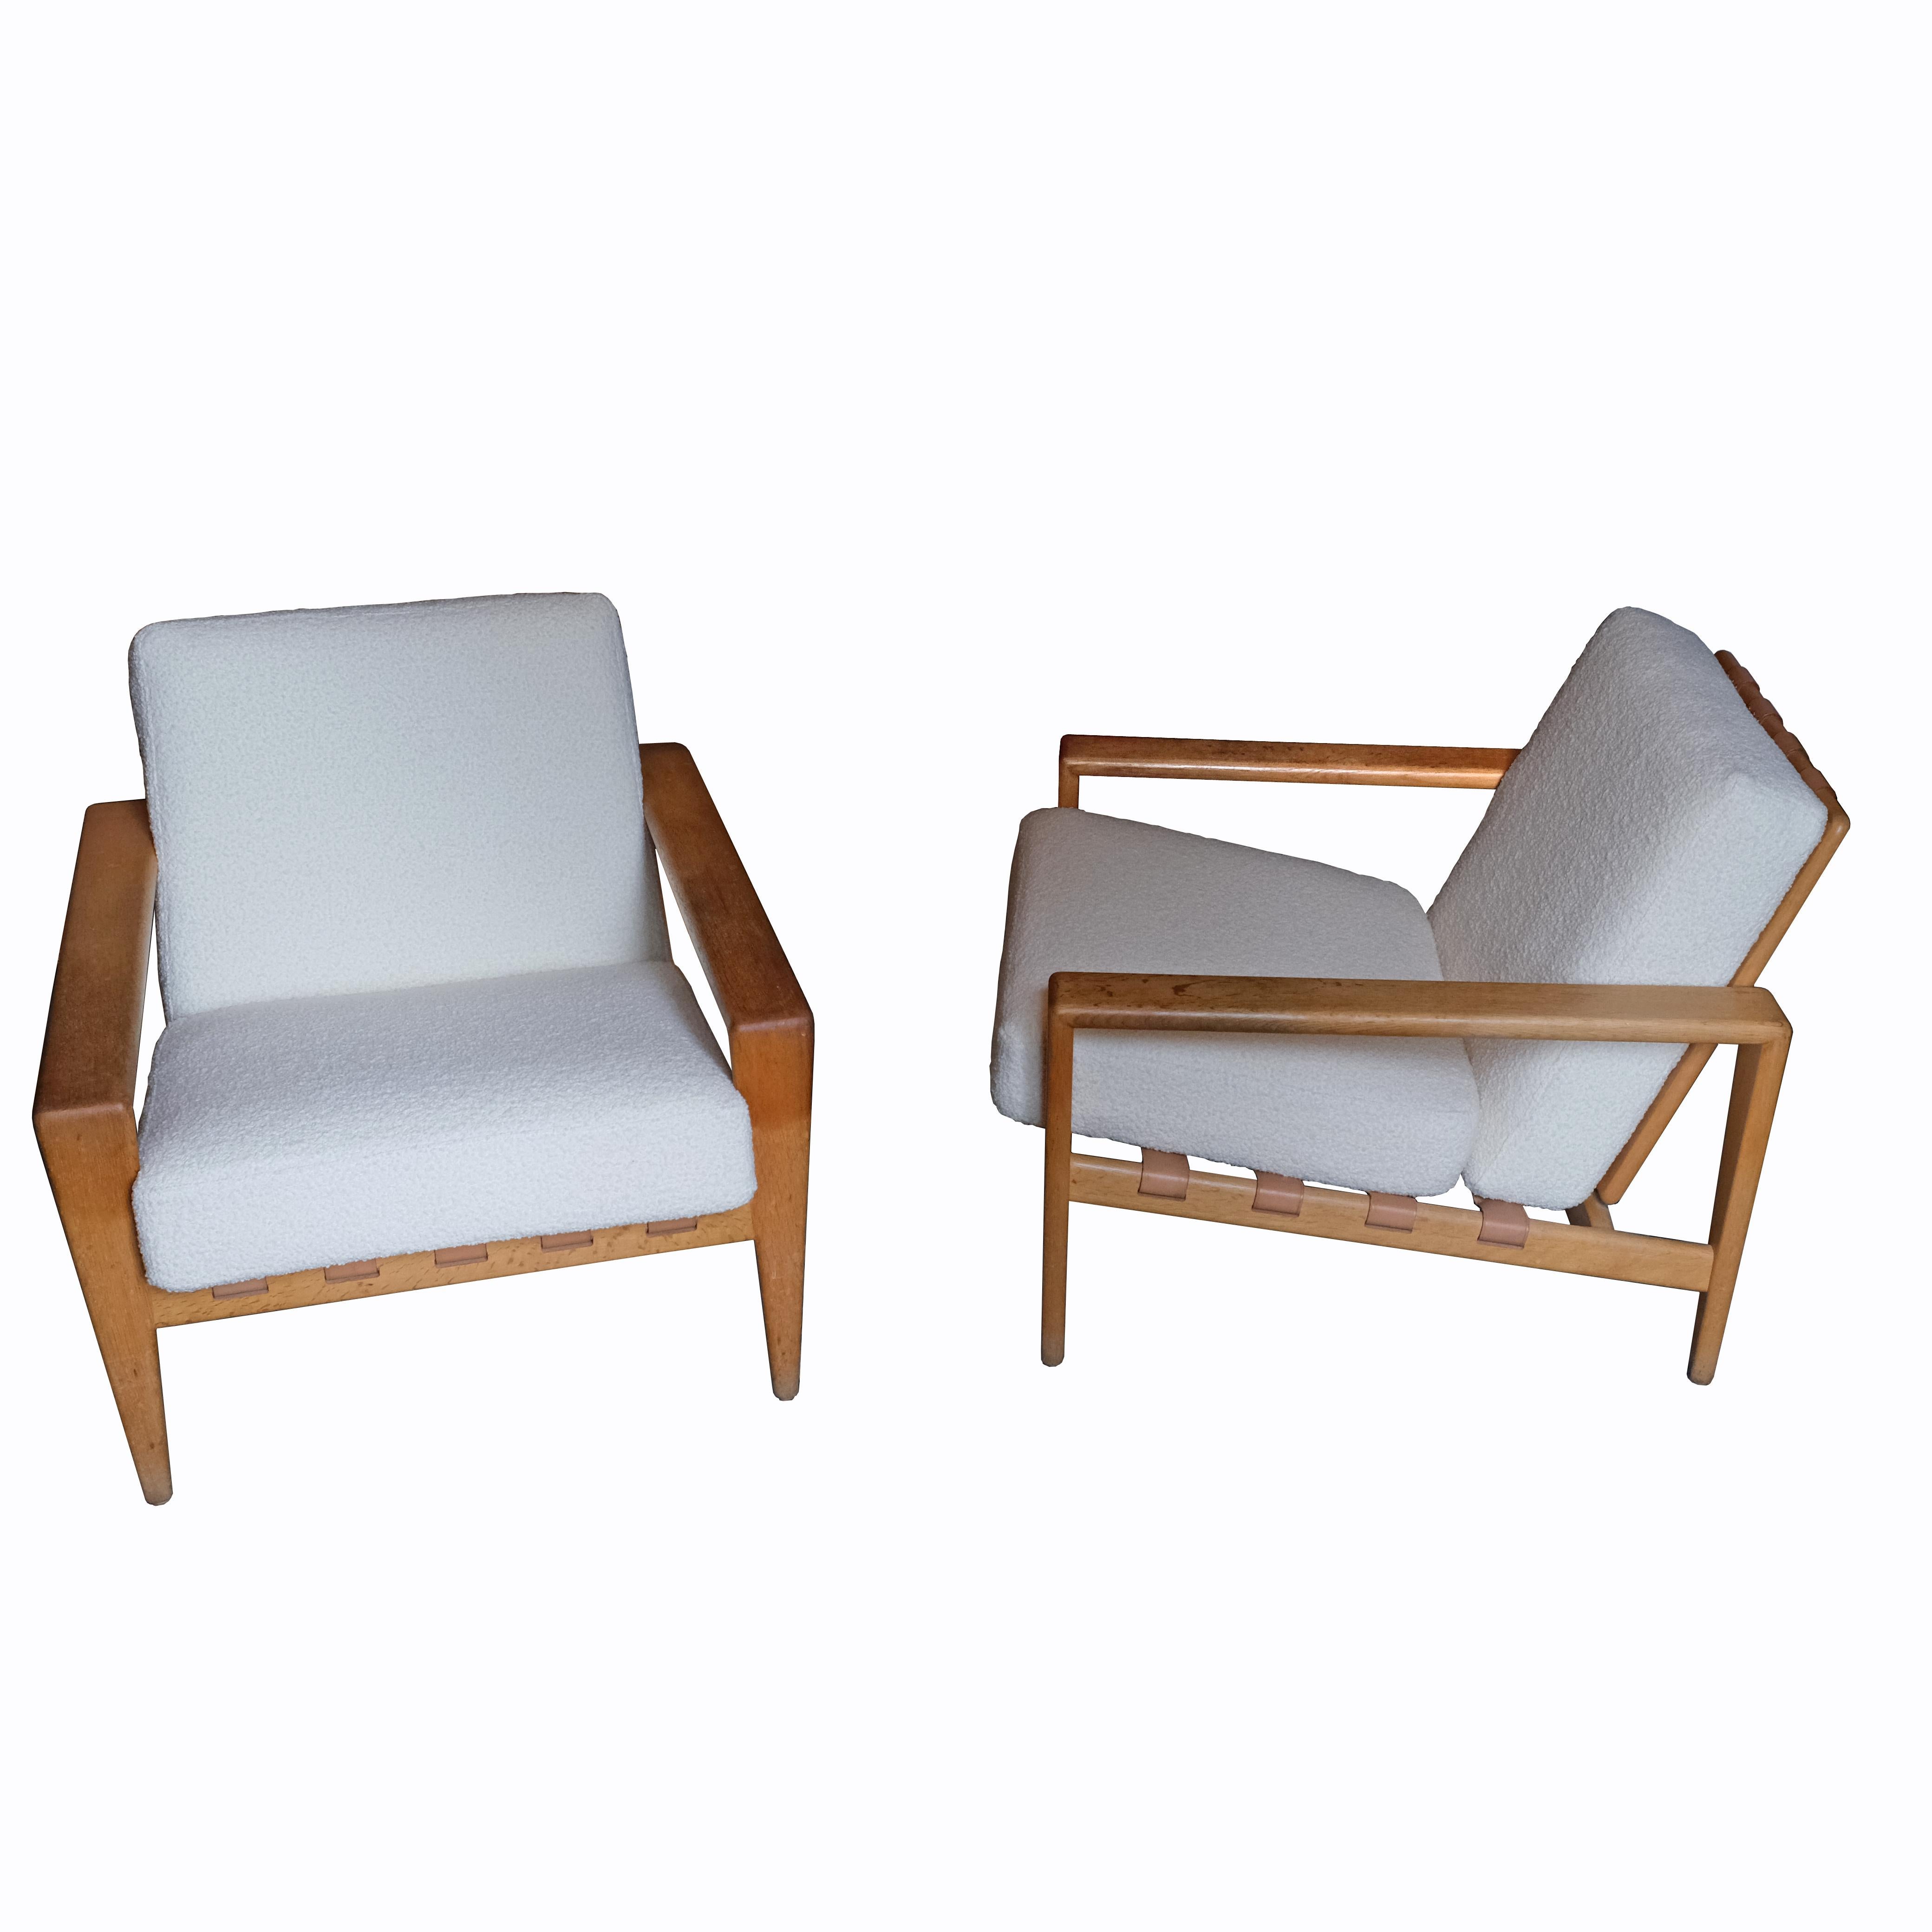 A beautiful and rare pair of lounge armchairs, with an oak frame, the seat and back with brown leather stripes.
The cushions upholstered with a Bisson-Bruunel fabric.
Produced by Seffle Möbelfabrik.
Sweden.
1950s.
 